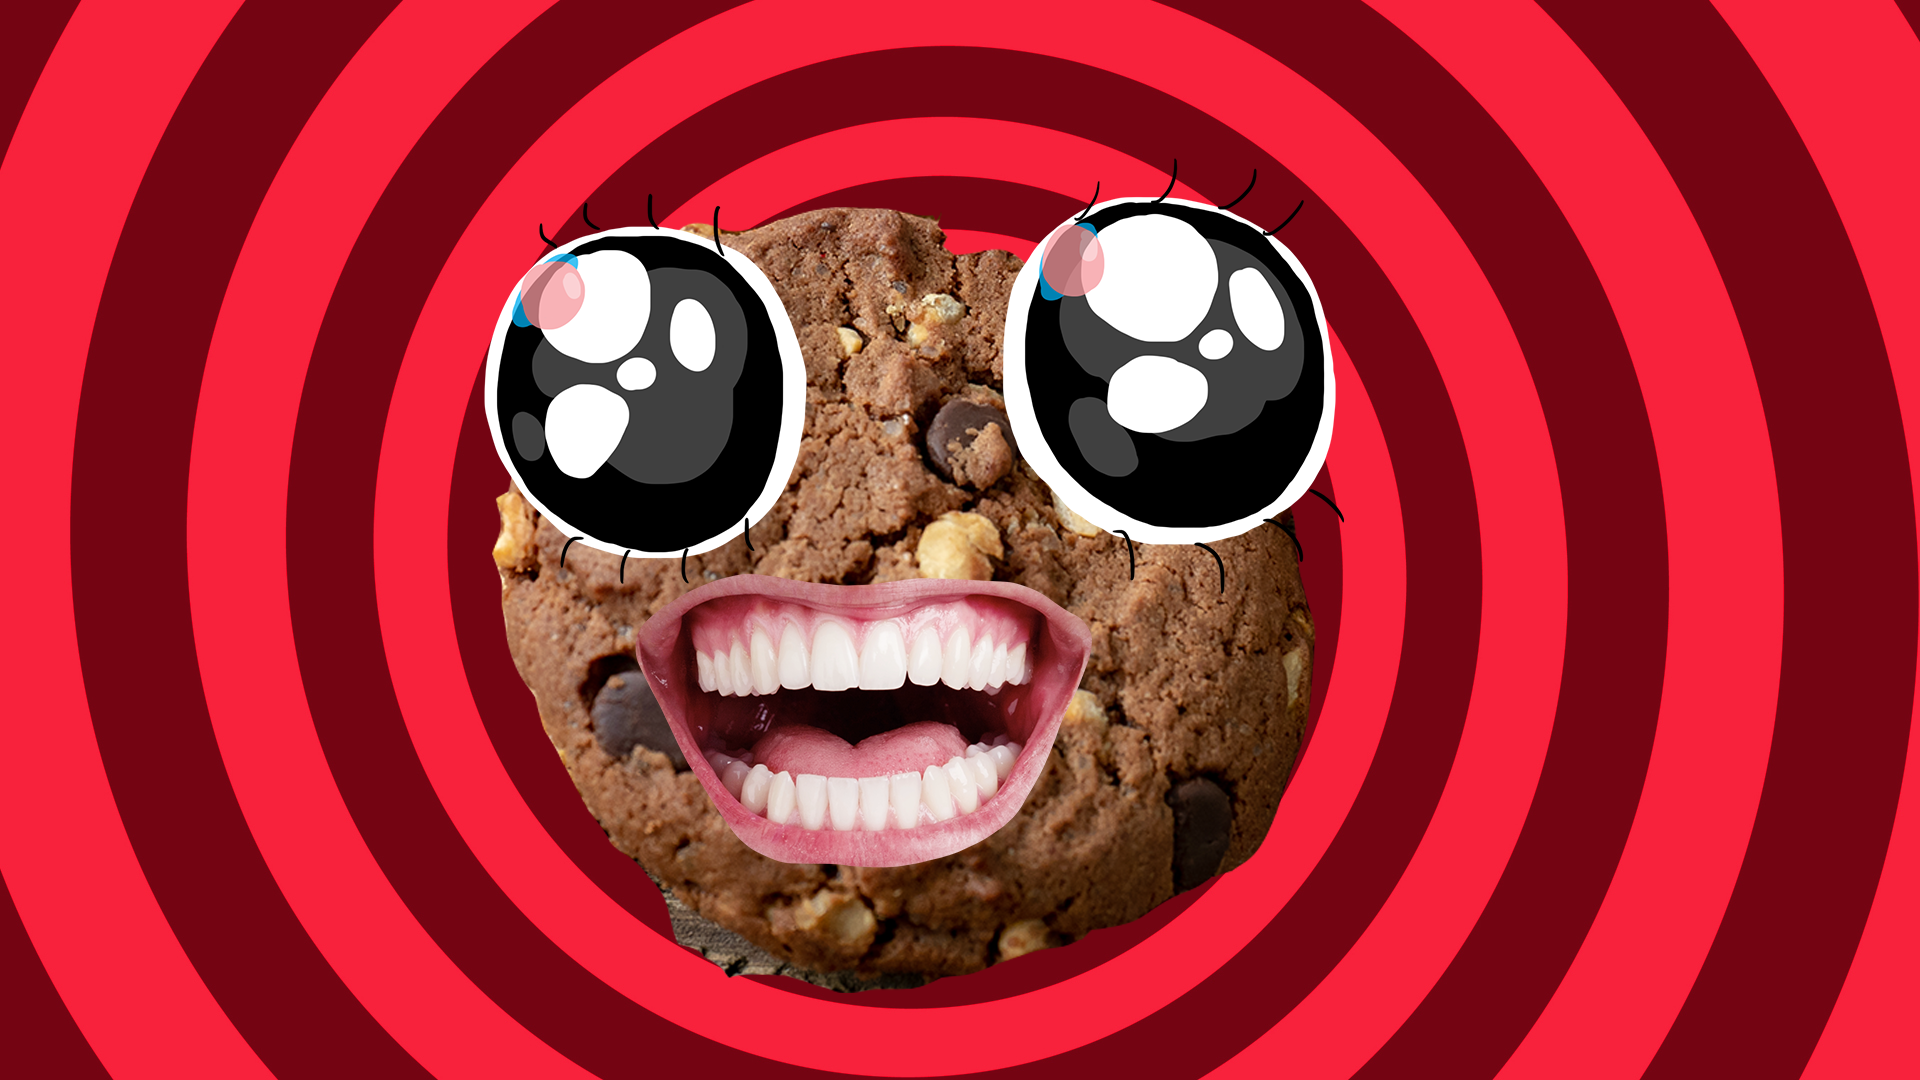 Grinning chocolate cookie